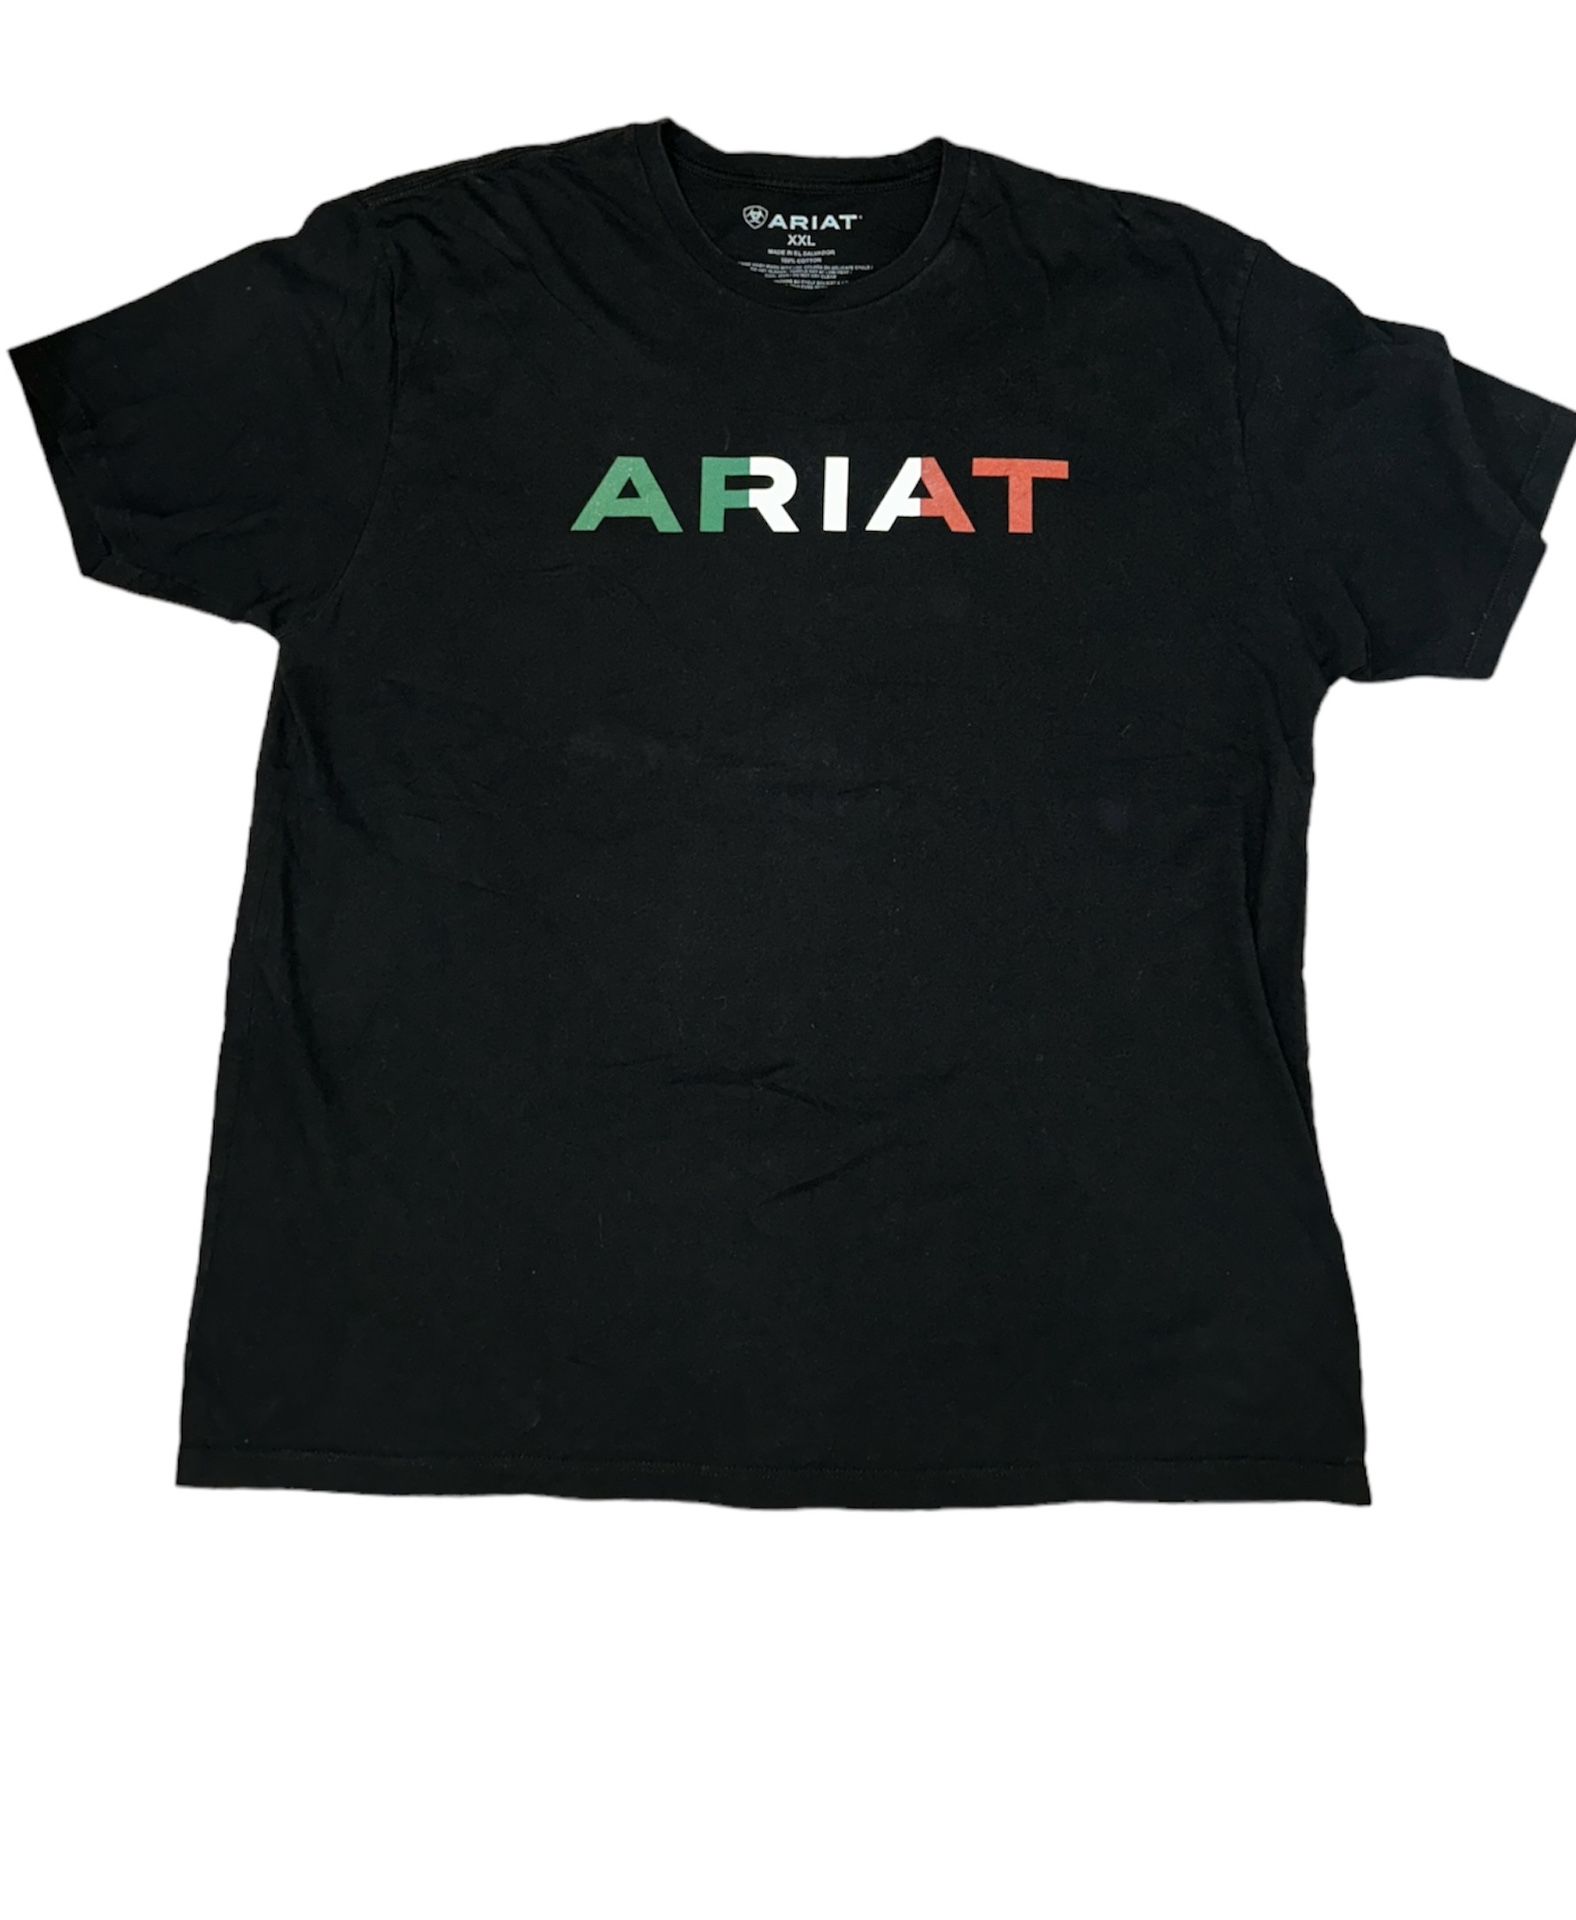 Ariat Boots Black Viva Mexico Graphic Spellout T-shirt Size Men’s Xlarge Used 